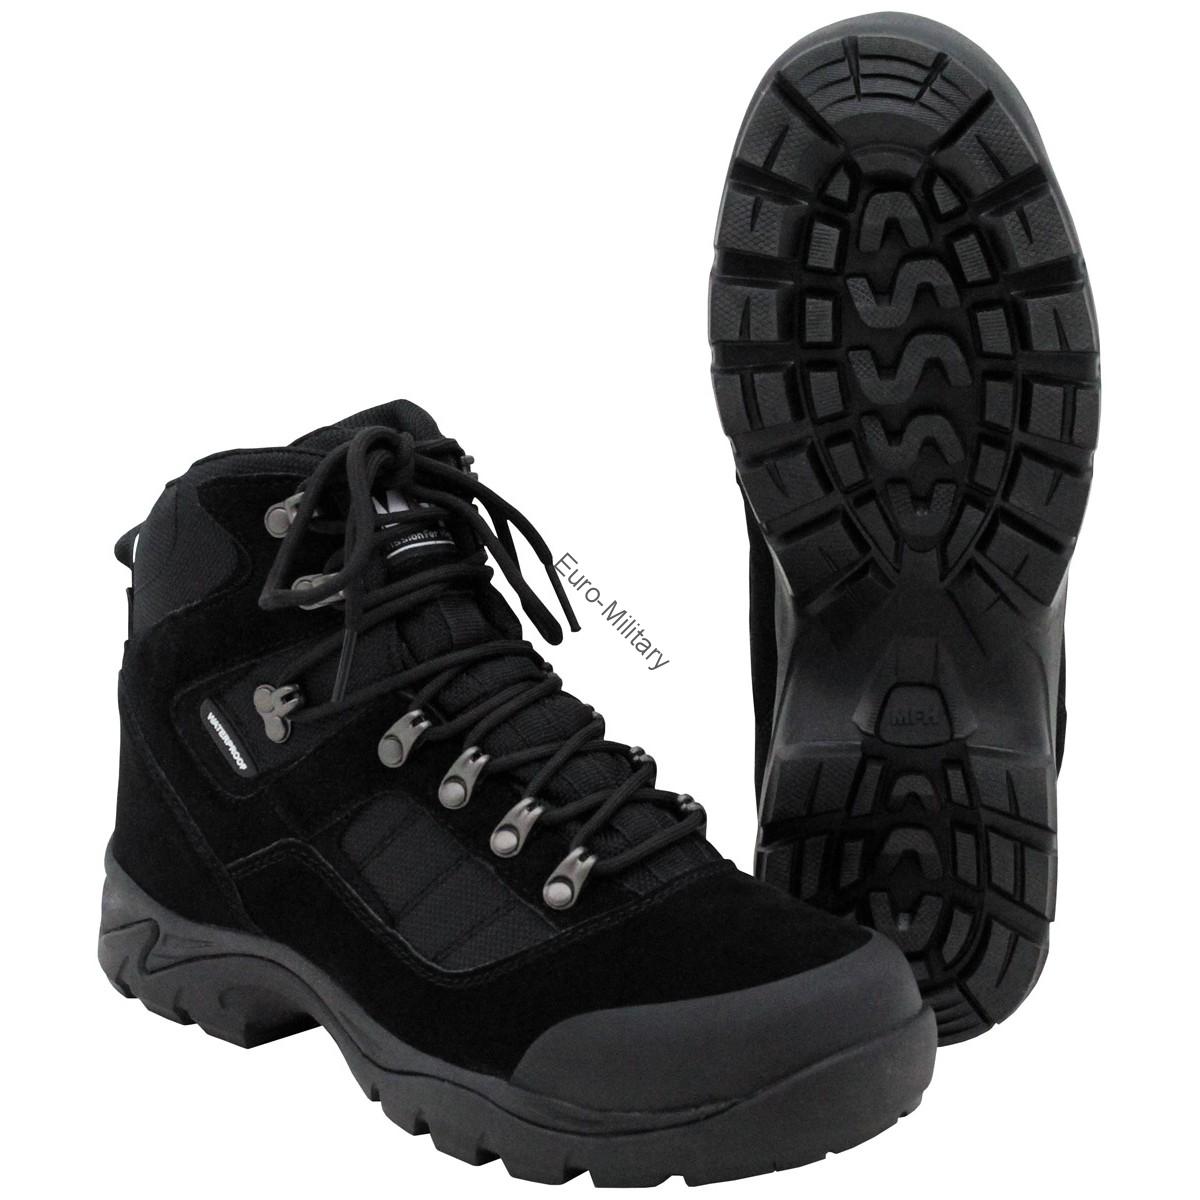 Tactical Police Security Combat Boots w/ HBR Membrane - Black